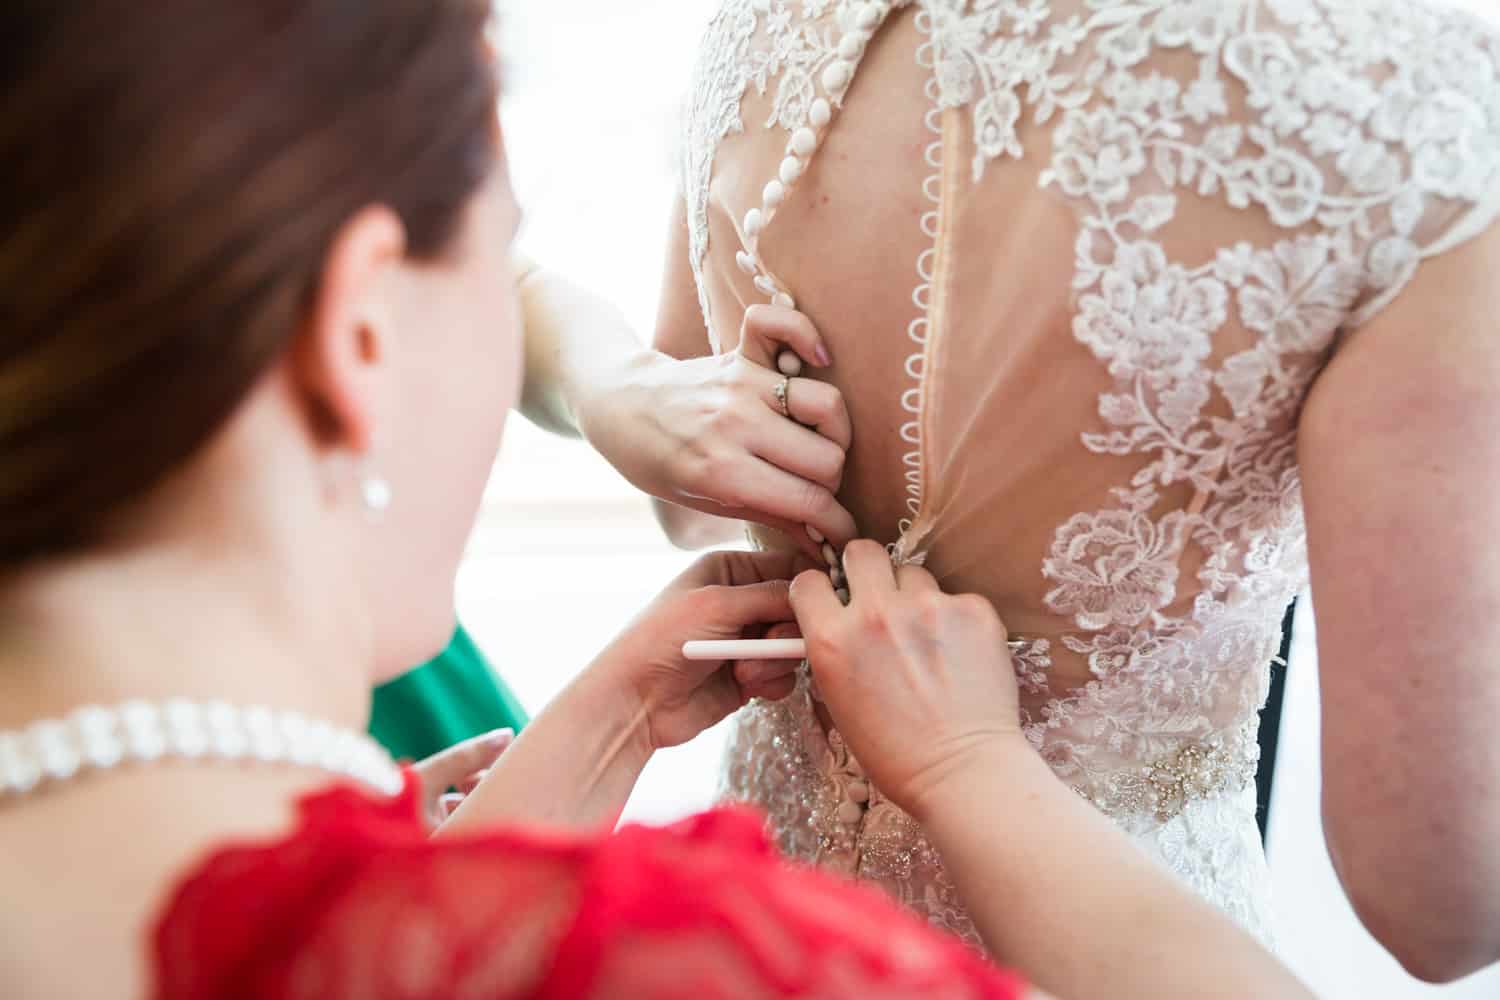 Close up on hands buttoning up bride into wedding dress